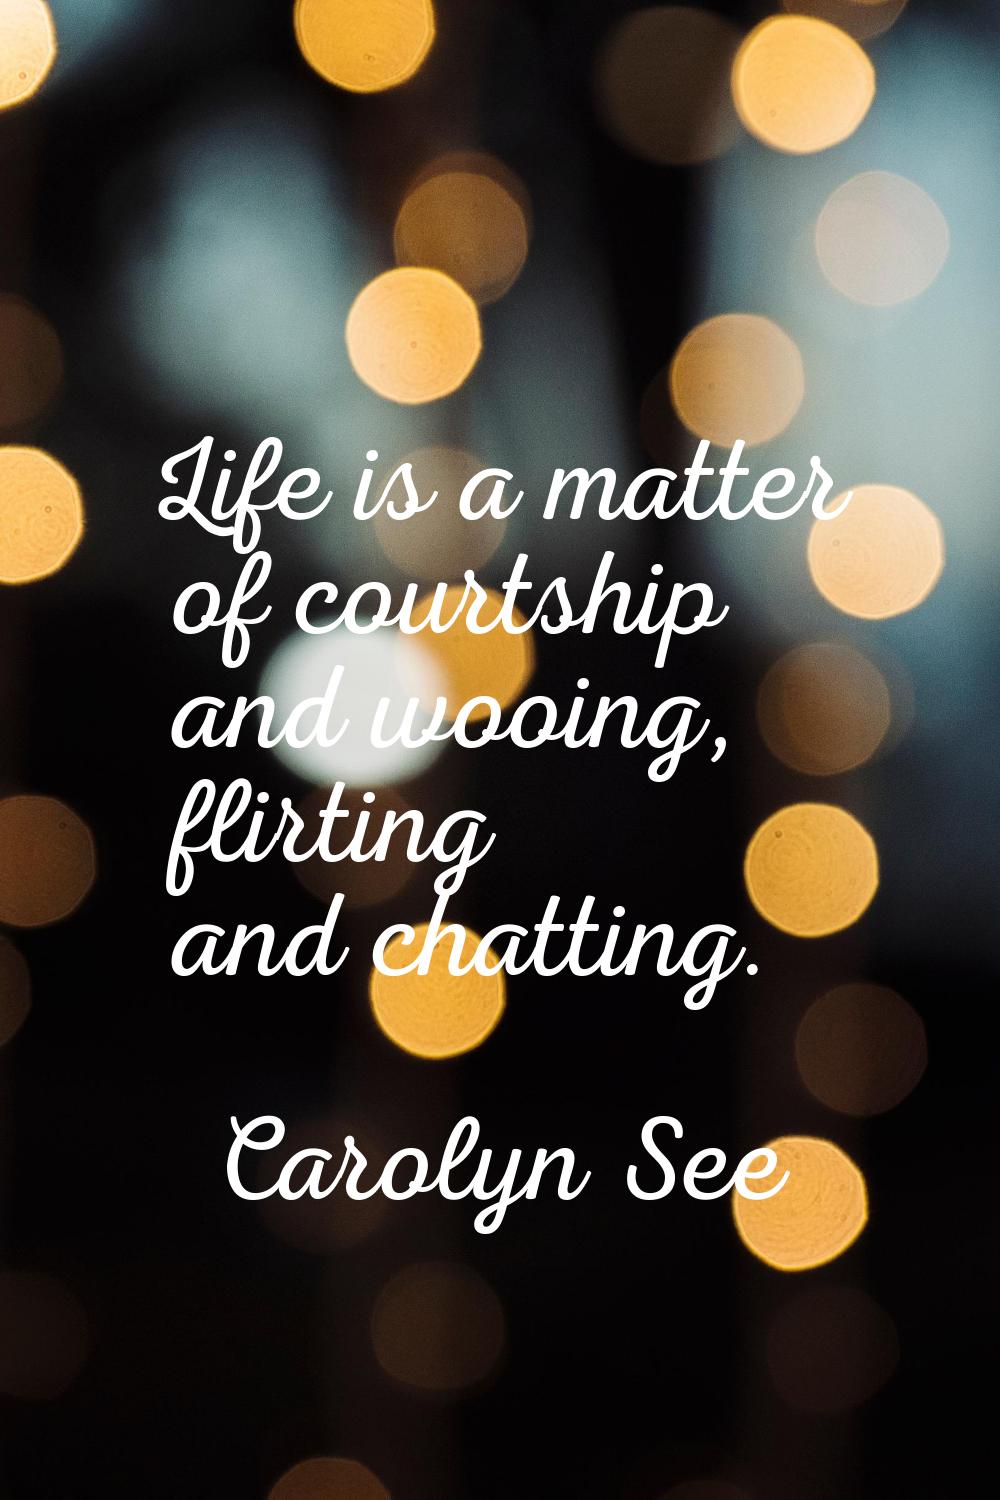 Life is a matter of courtship and wooing, flirting and chatting.